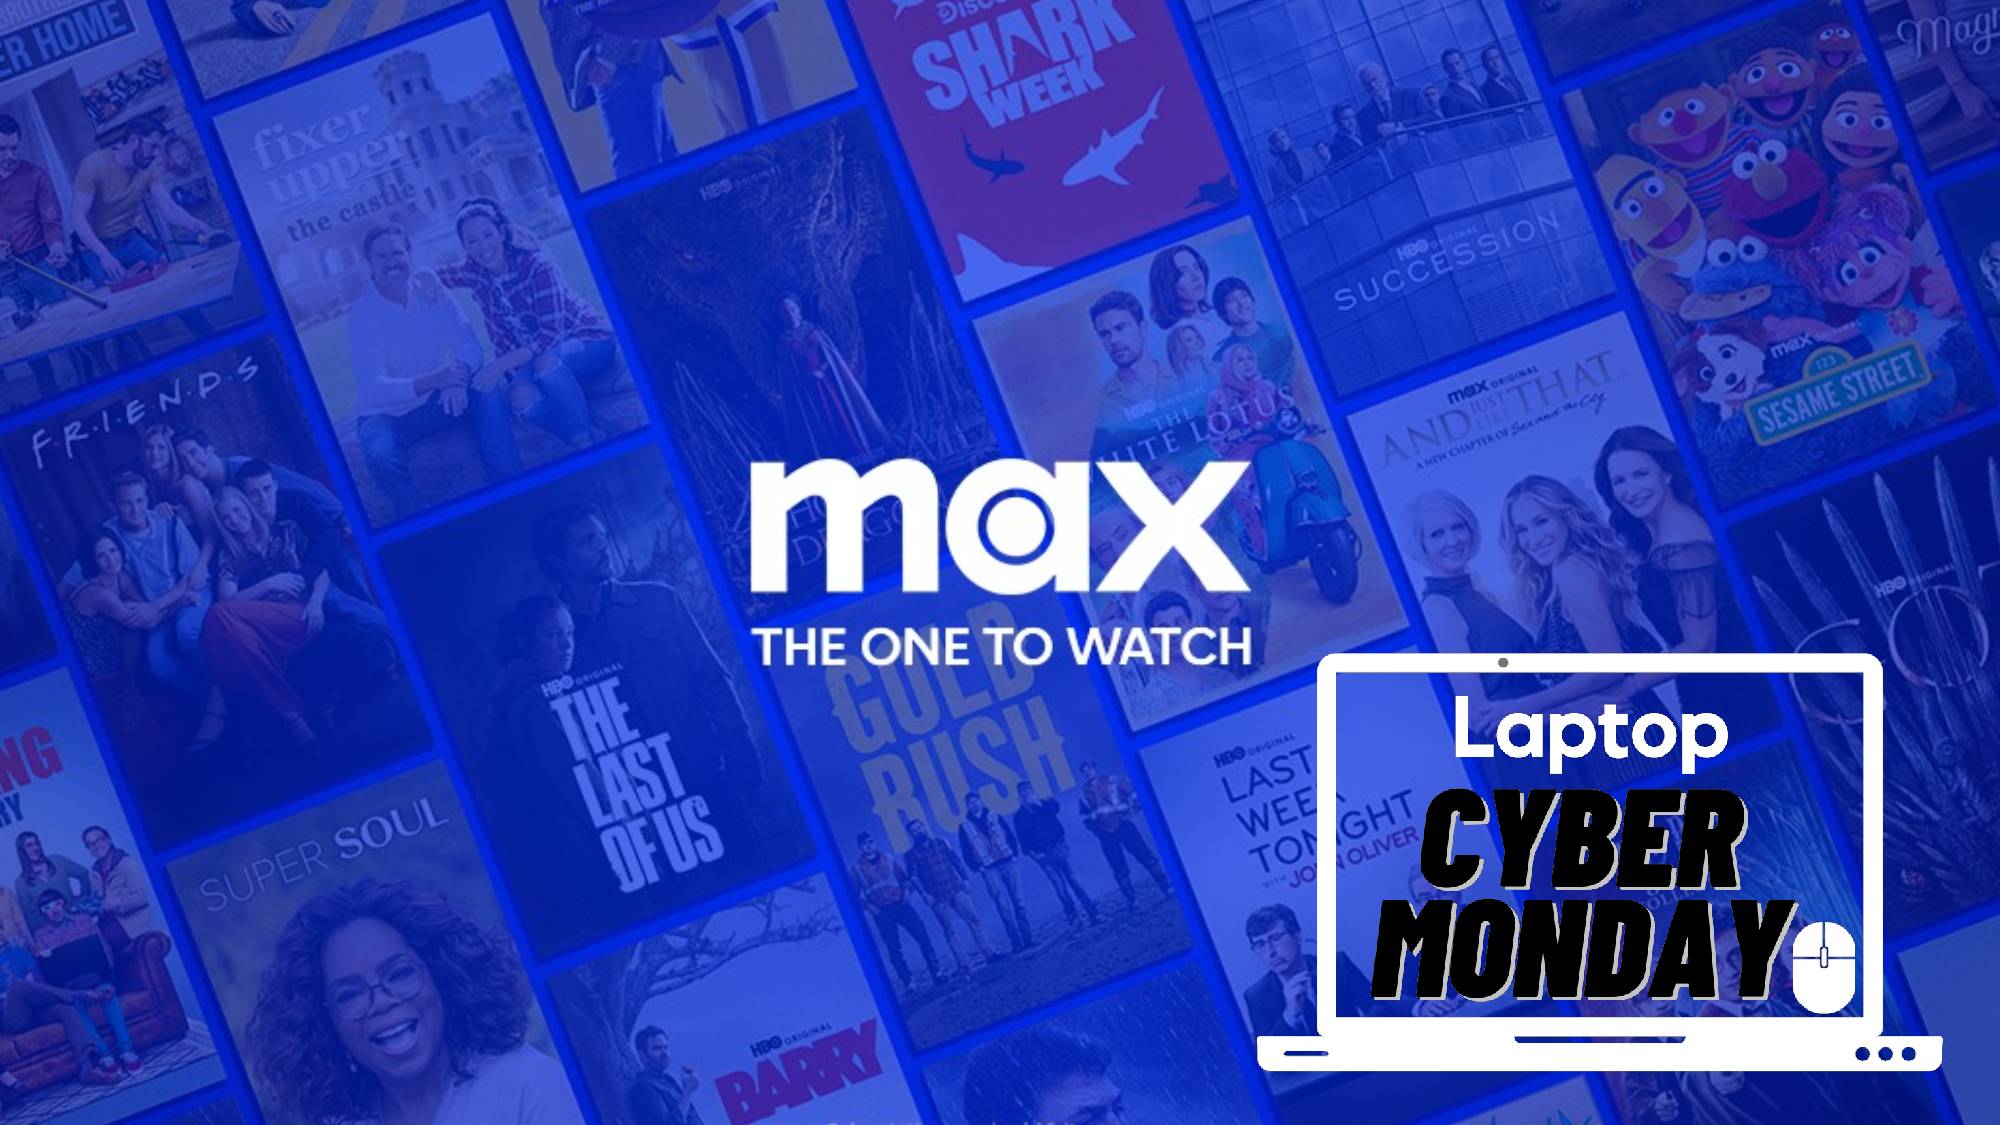 HBO Max Cyber Monday 2022 Deal: Last Chance to Save 80% On 3 Months of HBO  Max